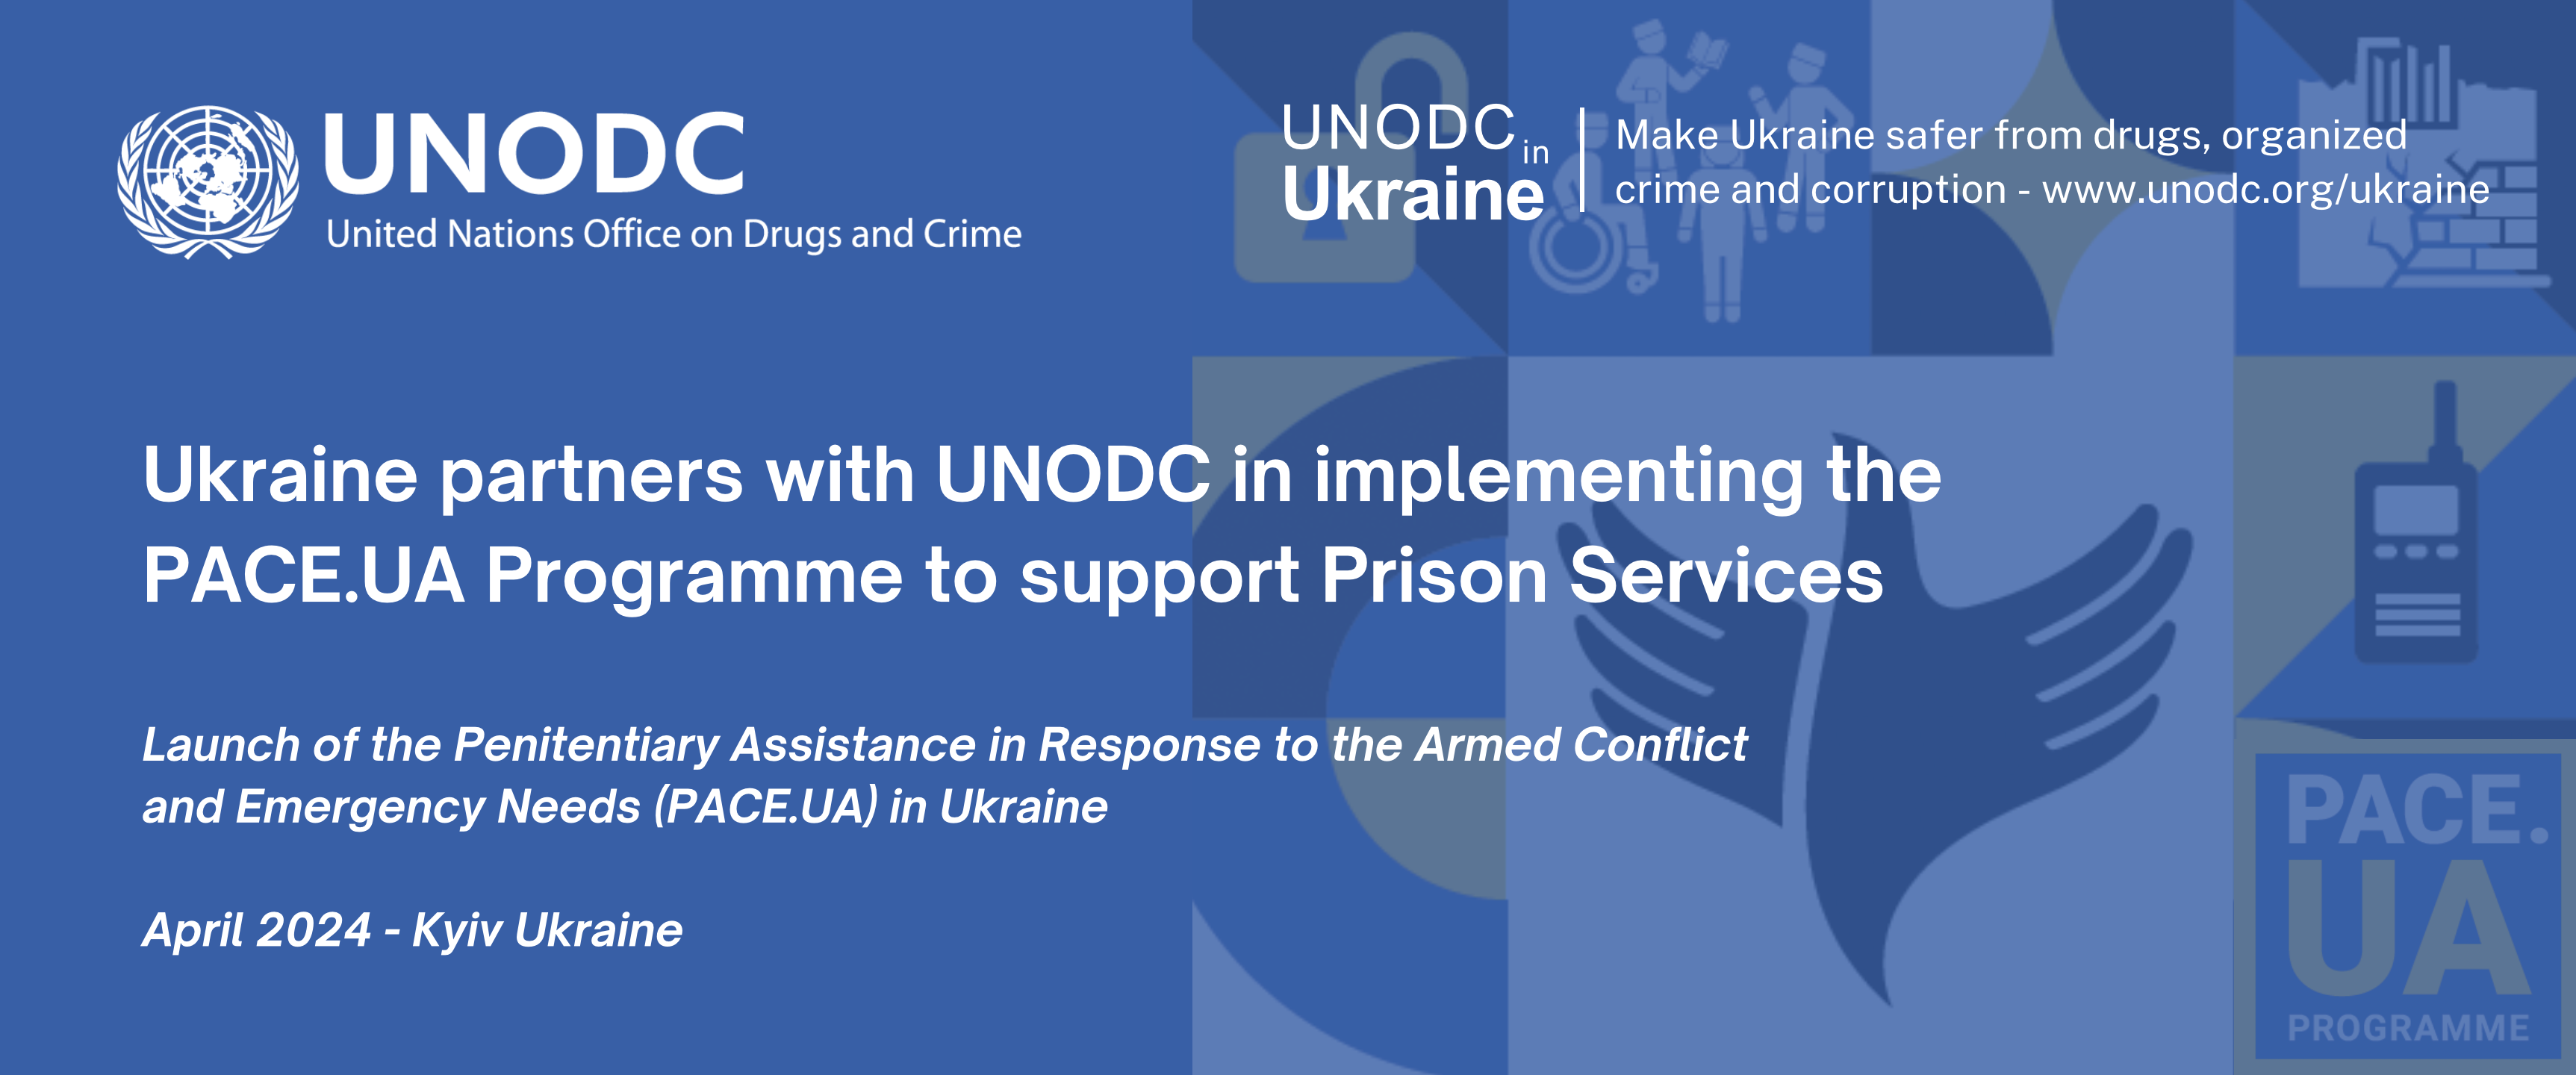 Webstory: Ukraine partners with UNODC in implementing the PACE.UA Programme to support Prison Services 